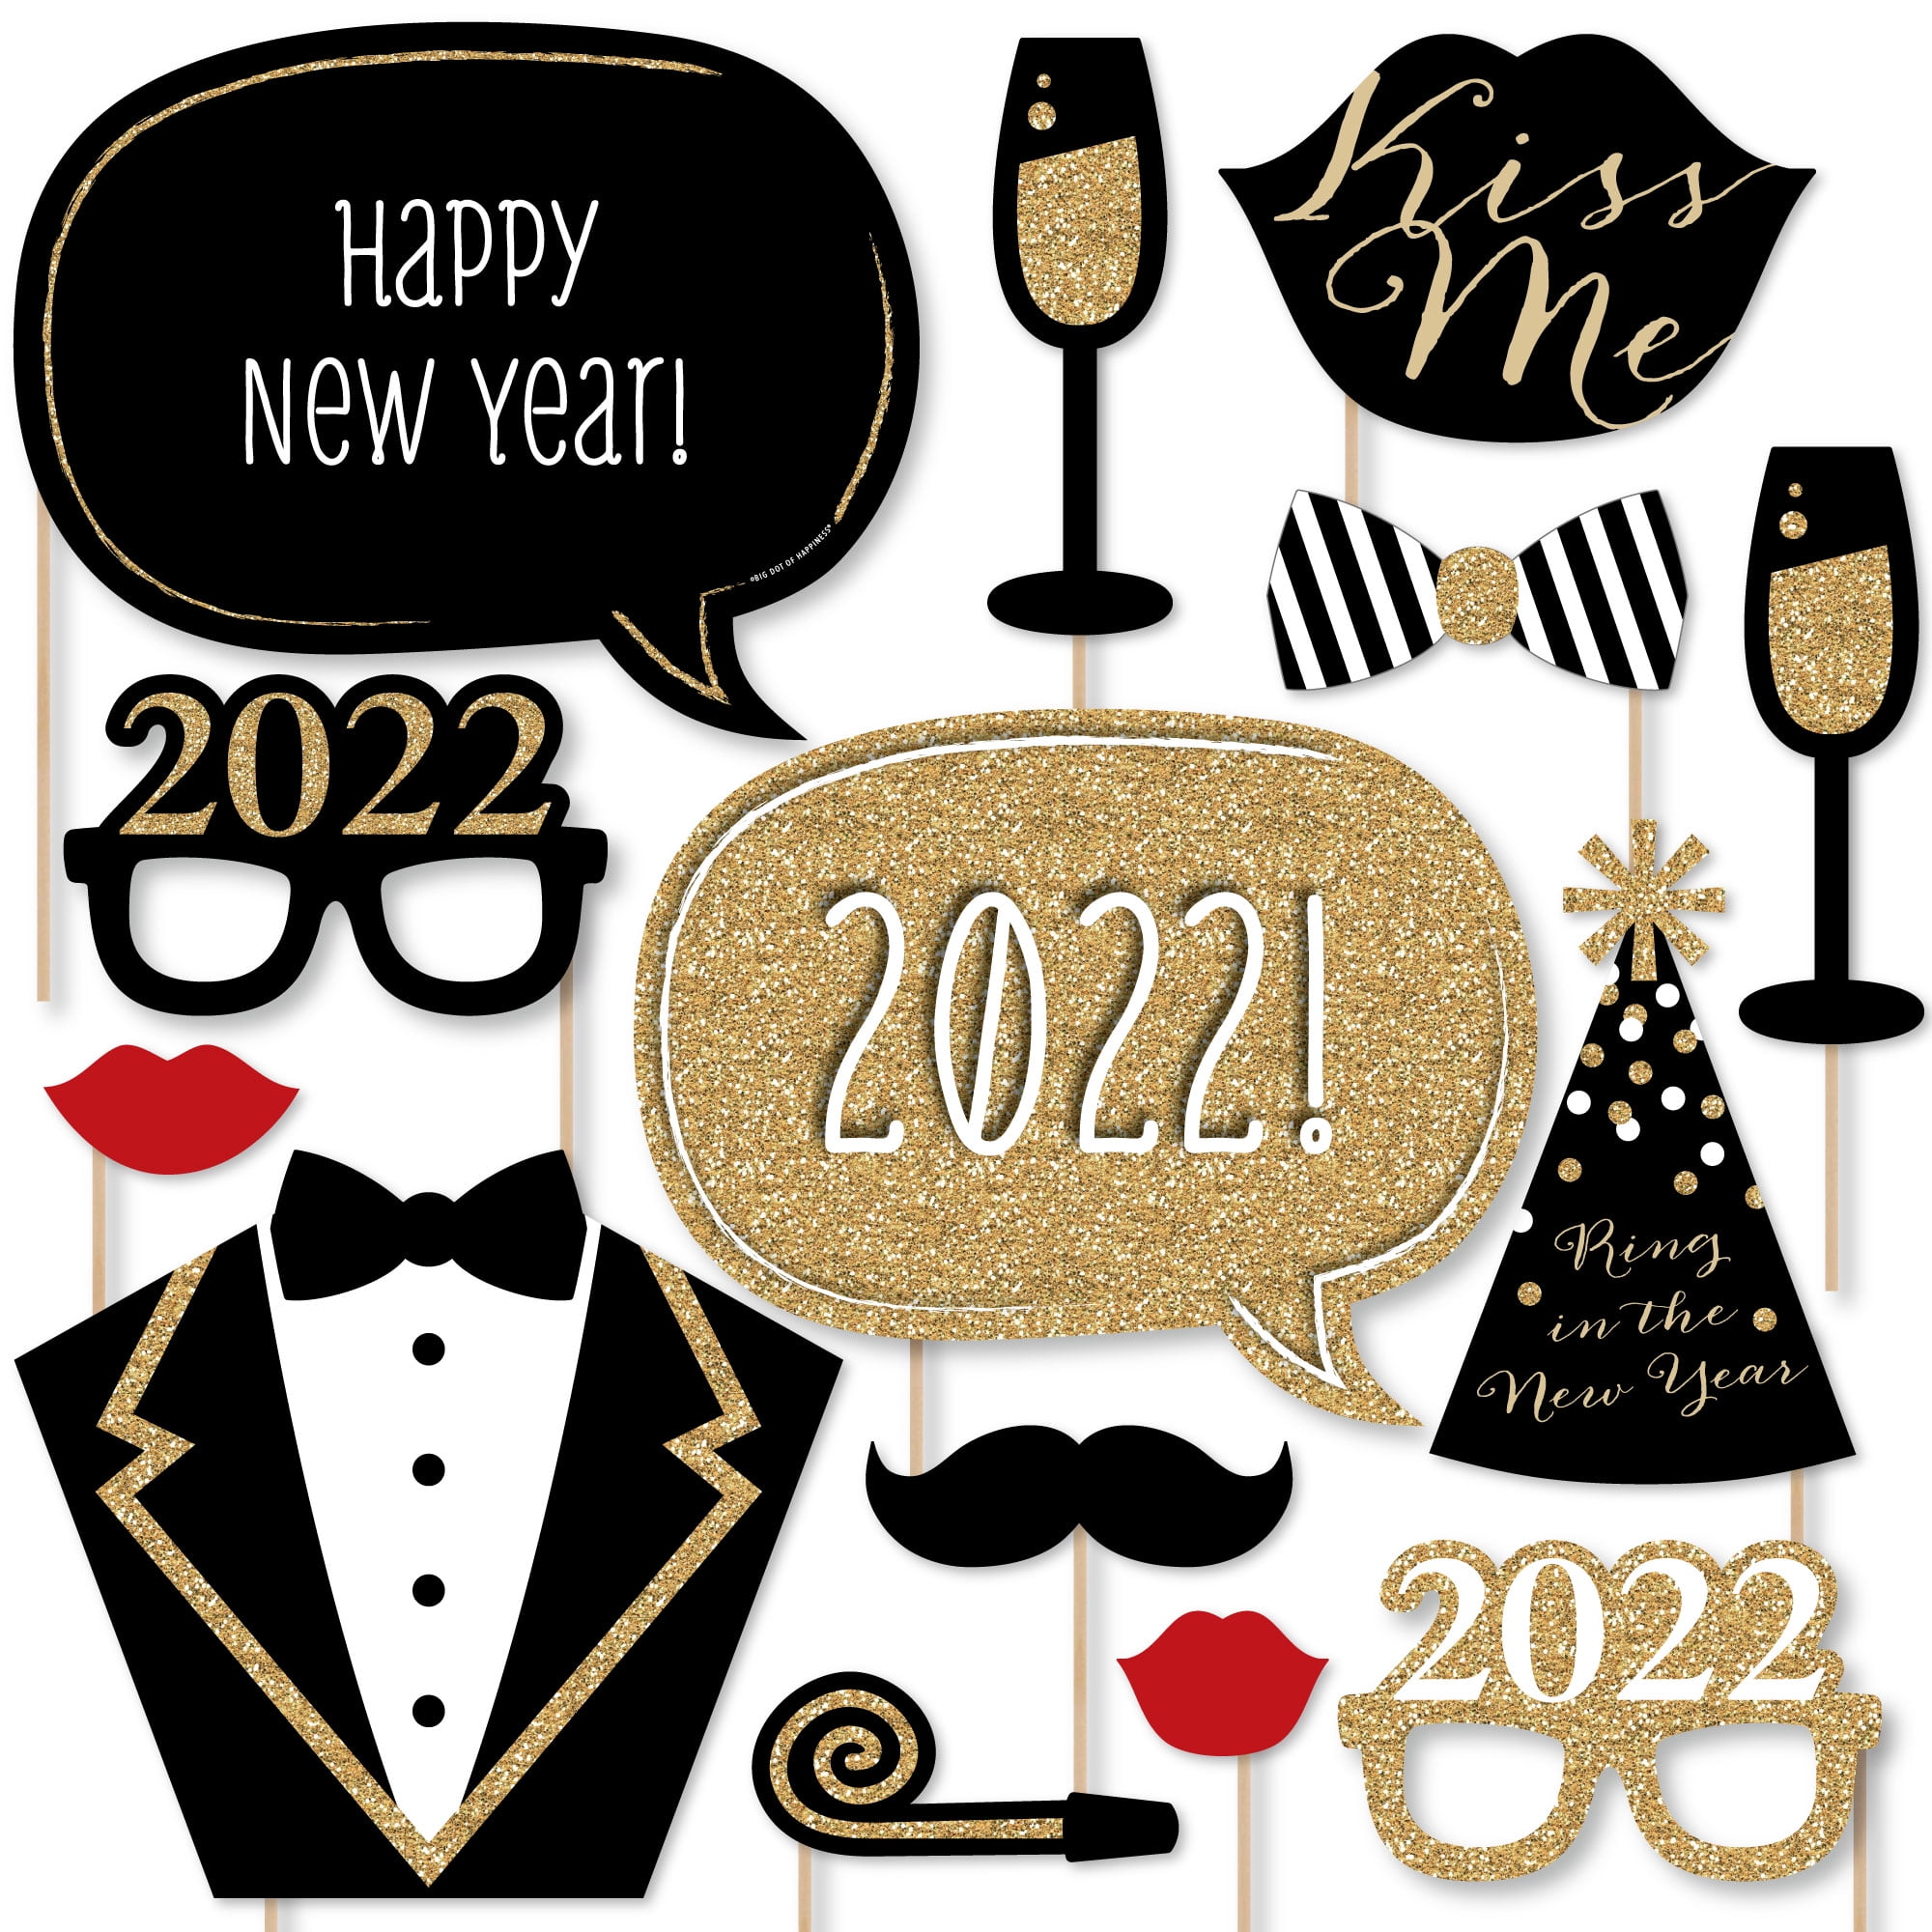 PRETYZOOM 20pcs 2022 New Years Photo Booth Props Selfie Photo Props Kit Festival Backdrop Photography Props New Year Supplies 